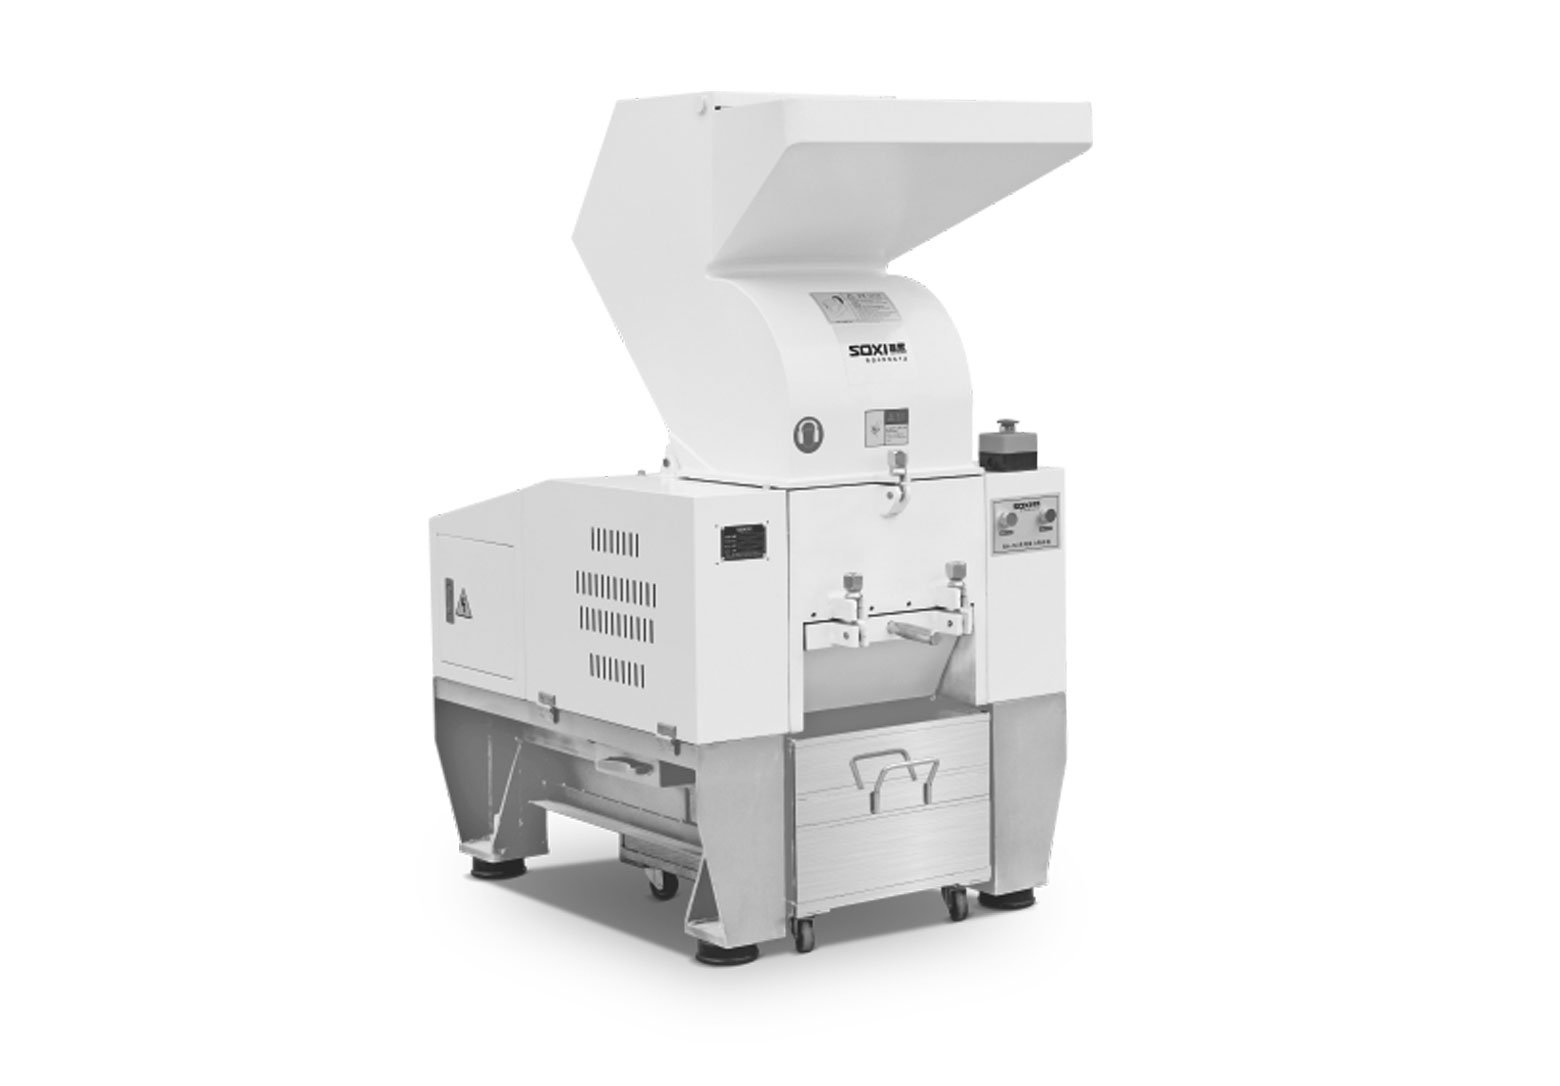 What Kind Of Plastic Crusher Does Soxi Produce, And What Features Does Plastic Crusher Have Respectively?